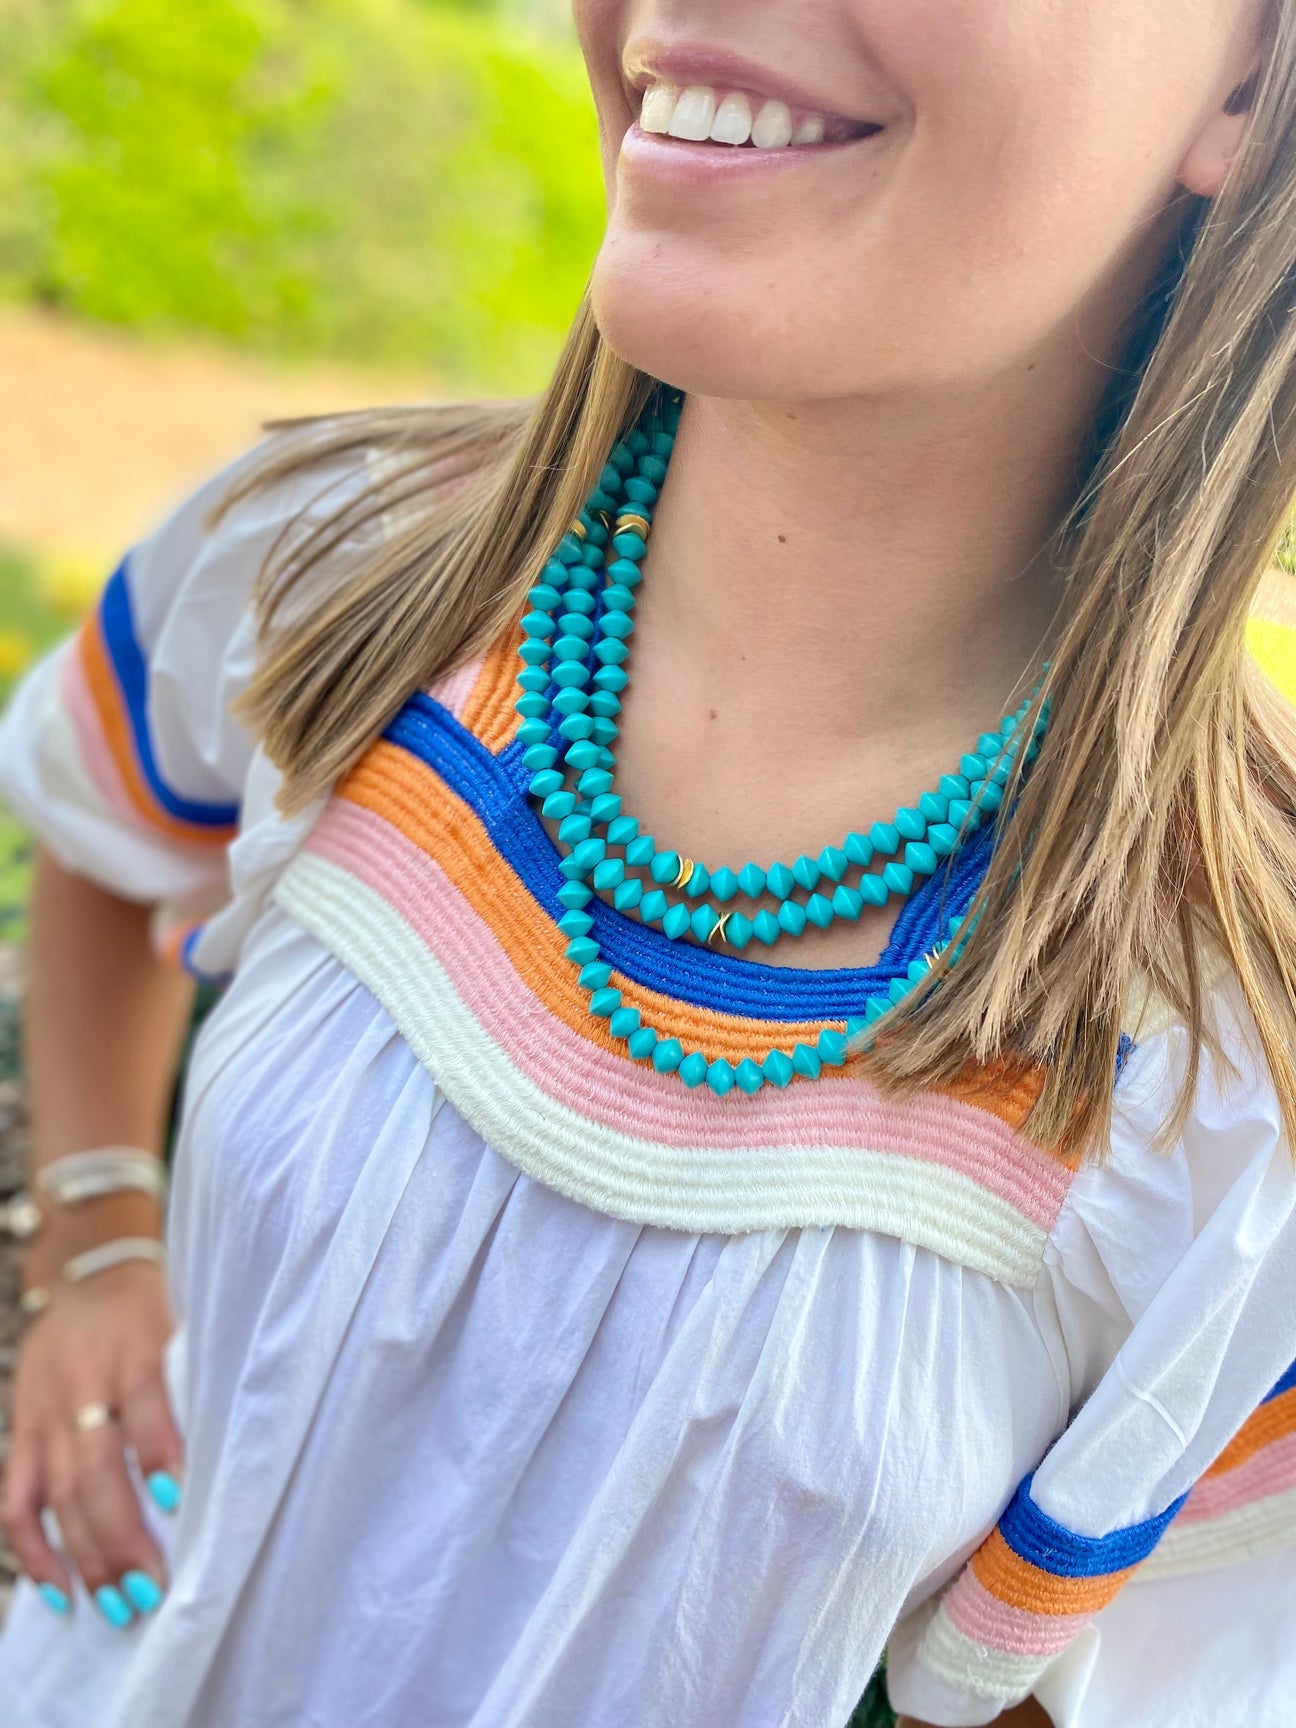 LONG WRAP NECKLACE - TURQUOISE